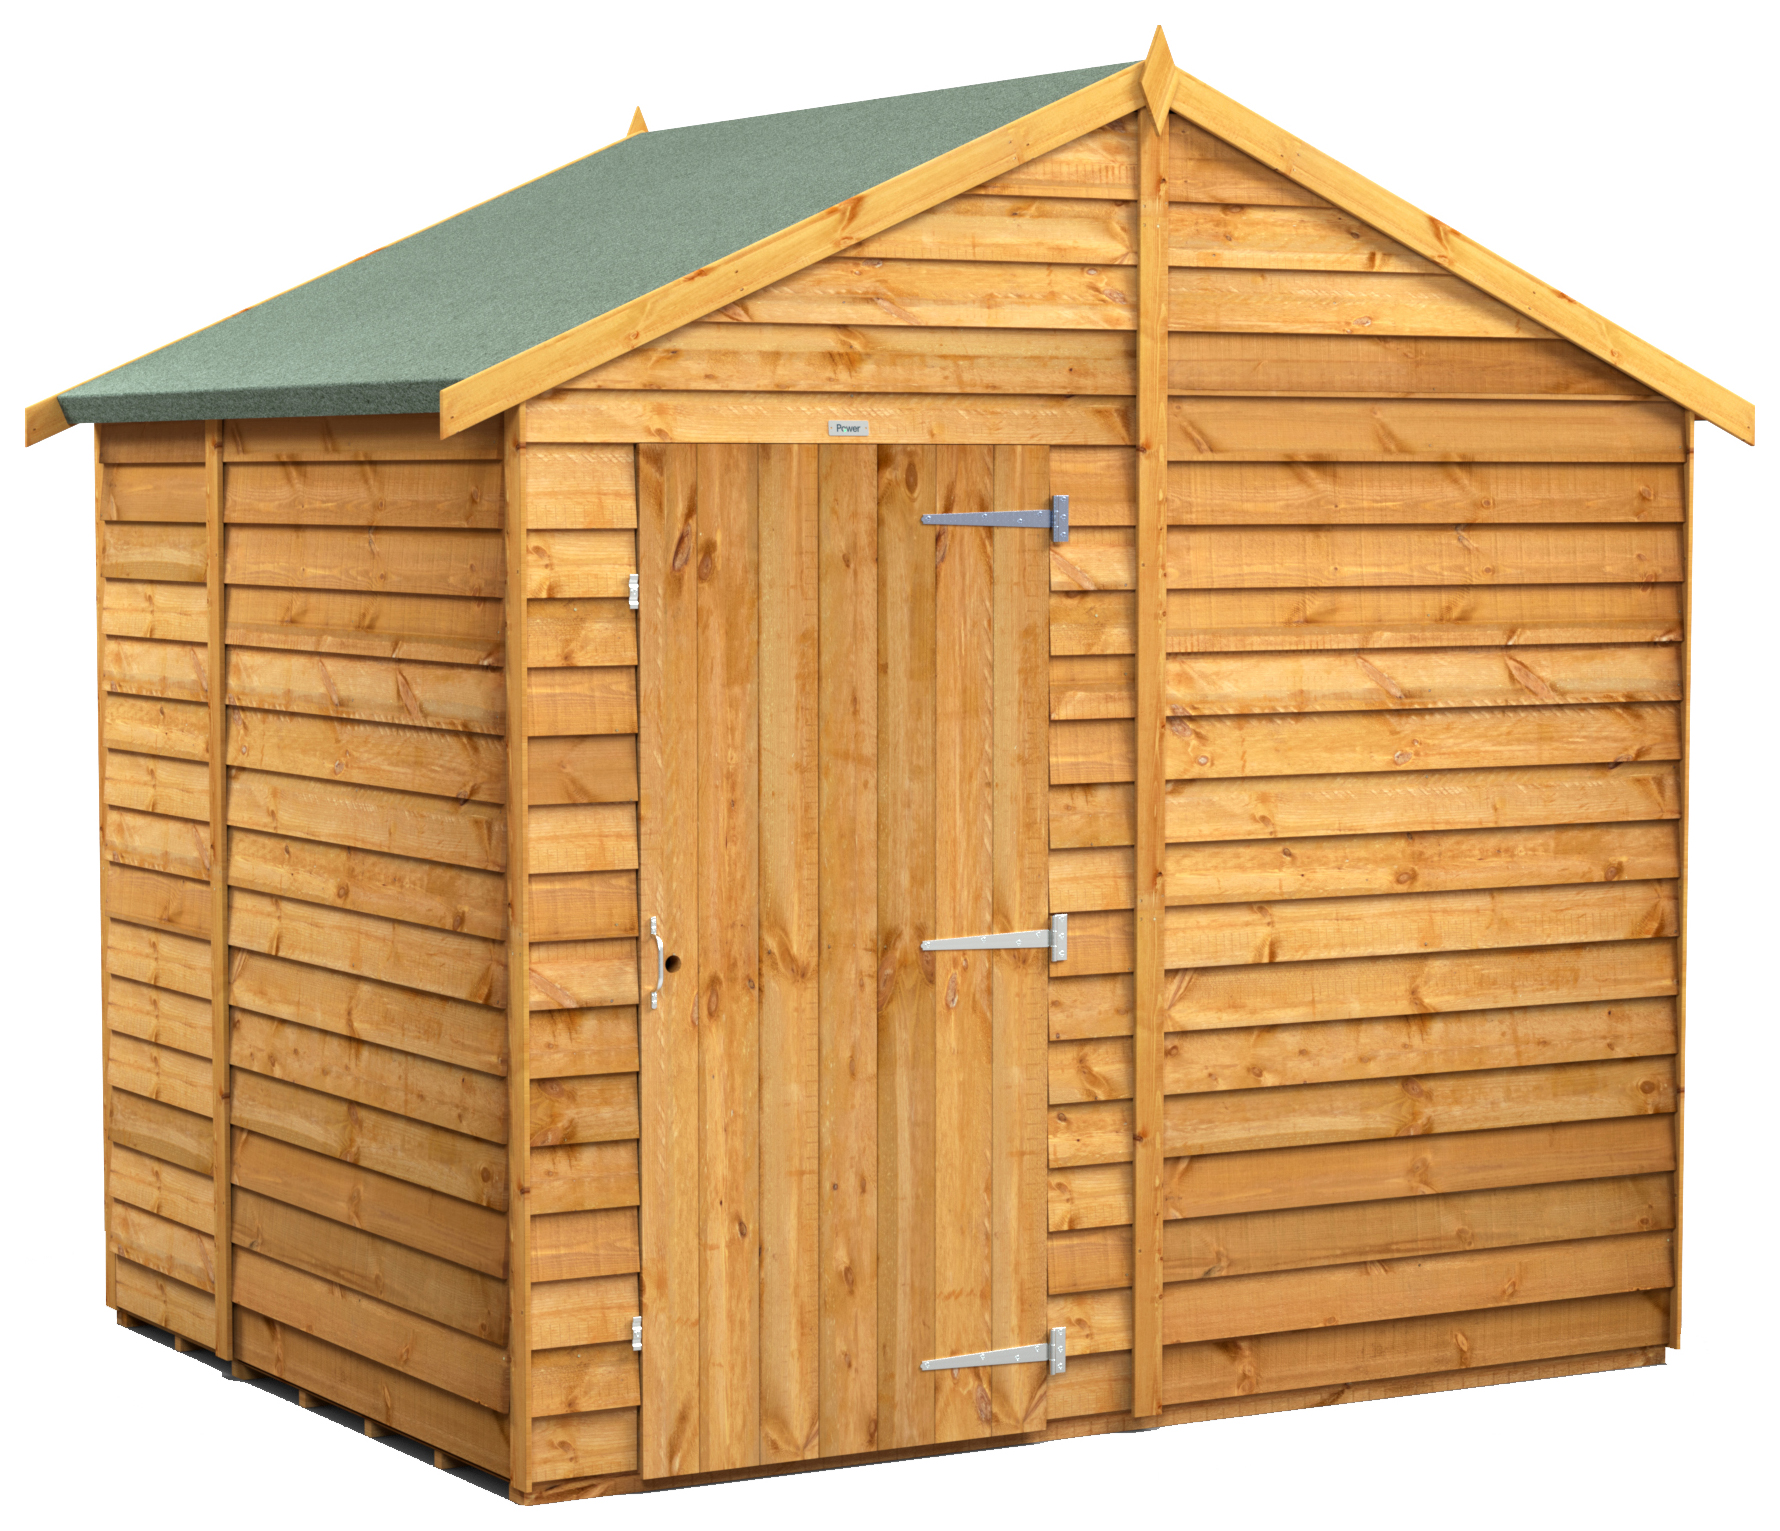 Power Sheds 6 x 8ft Apex Overlap Dip Treated Windowless Shed